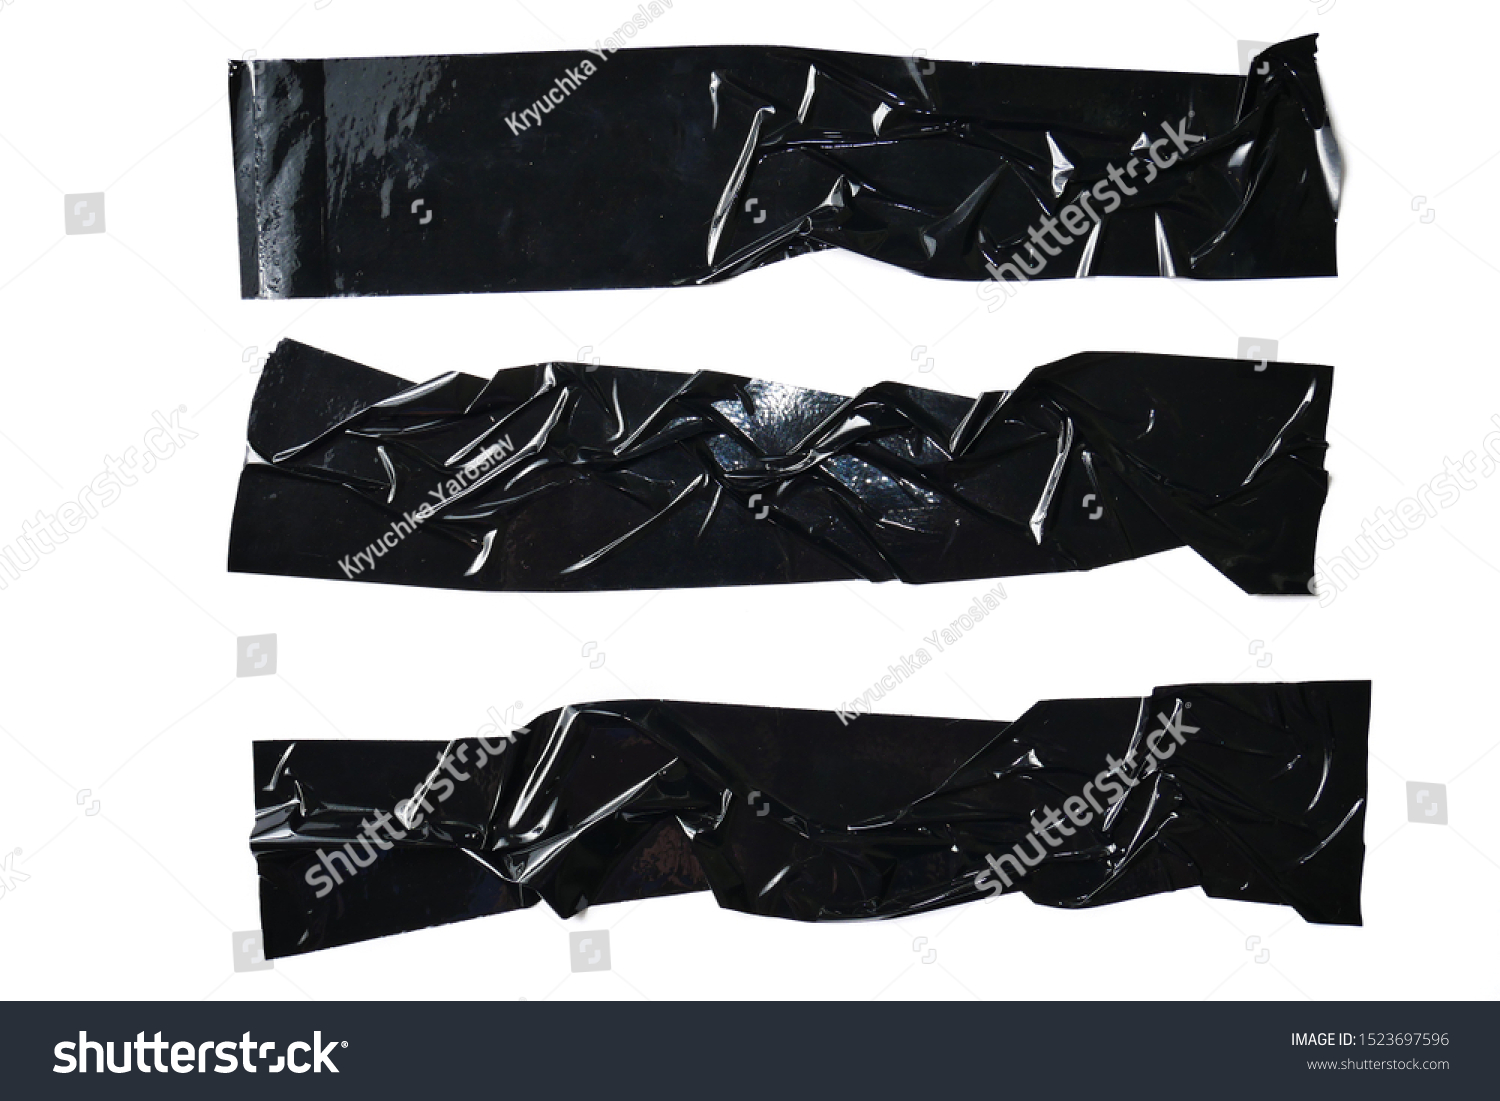 Set of various pieces of black duct tape, adhesive tape on white background #1523697596